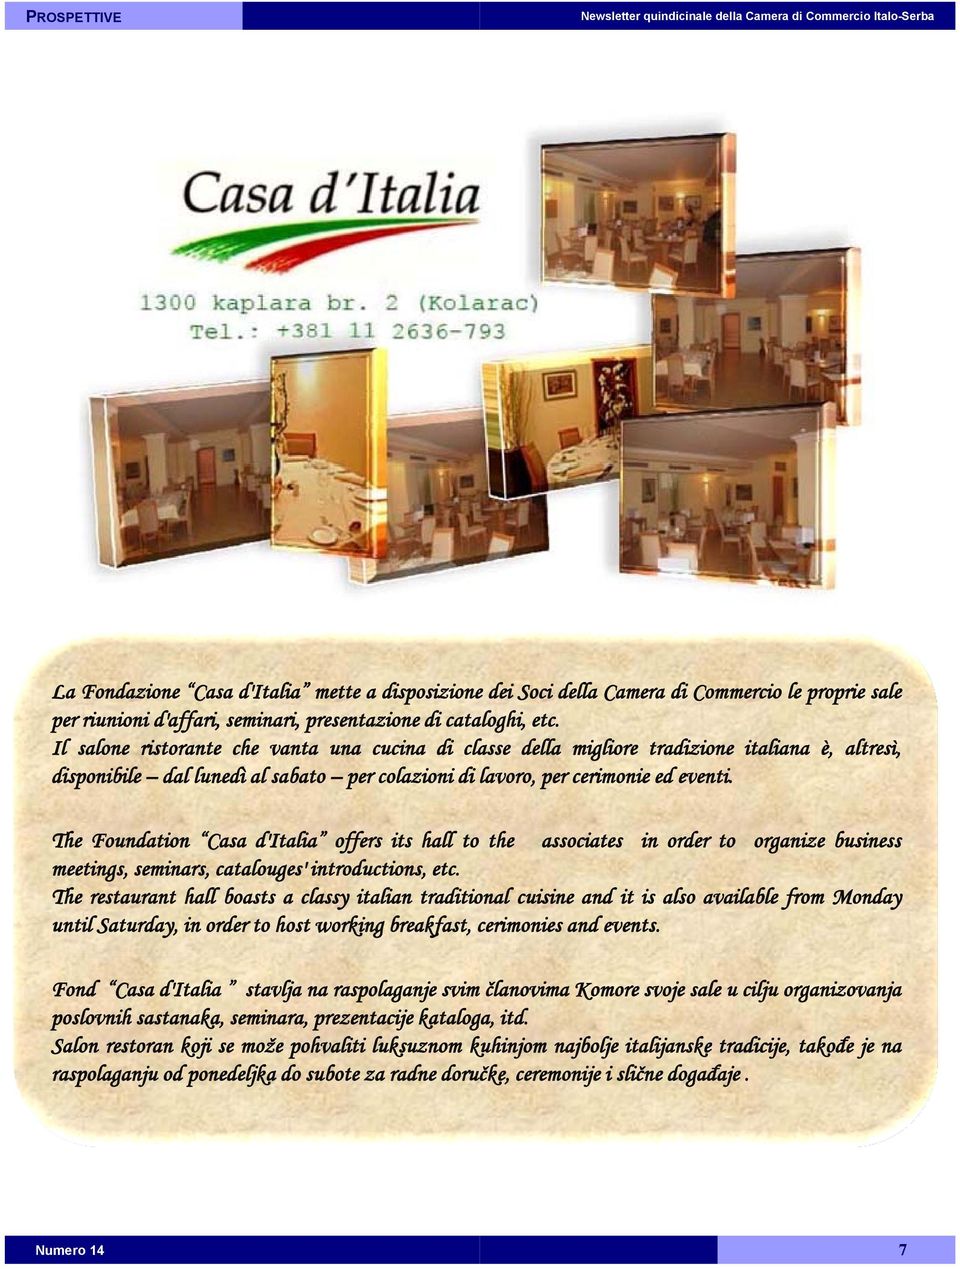 The Foundation Casa d'italia offers its hall to the meetings, seminars, catalouges' introductions, etc.